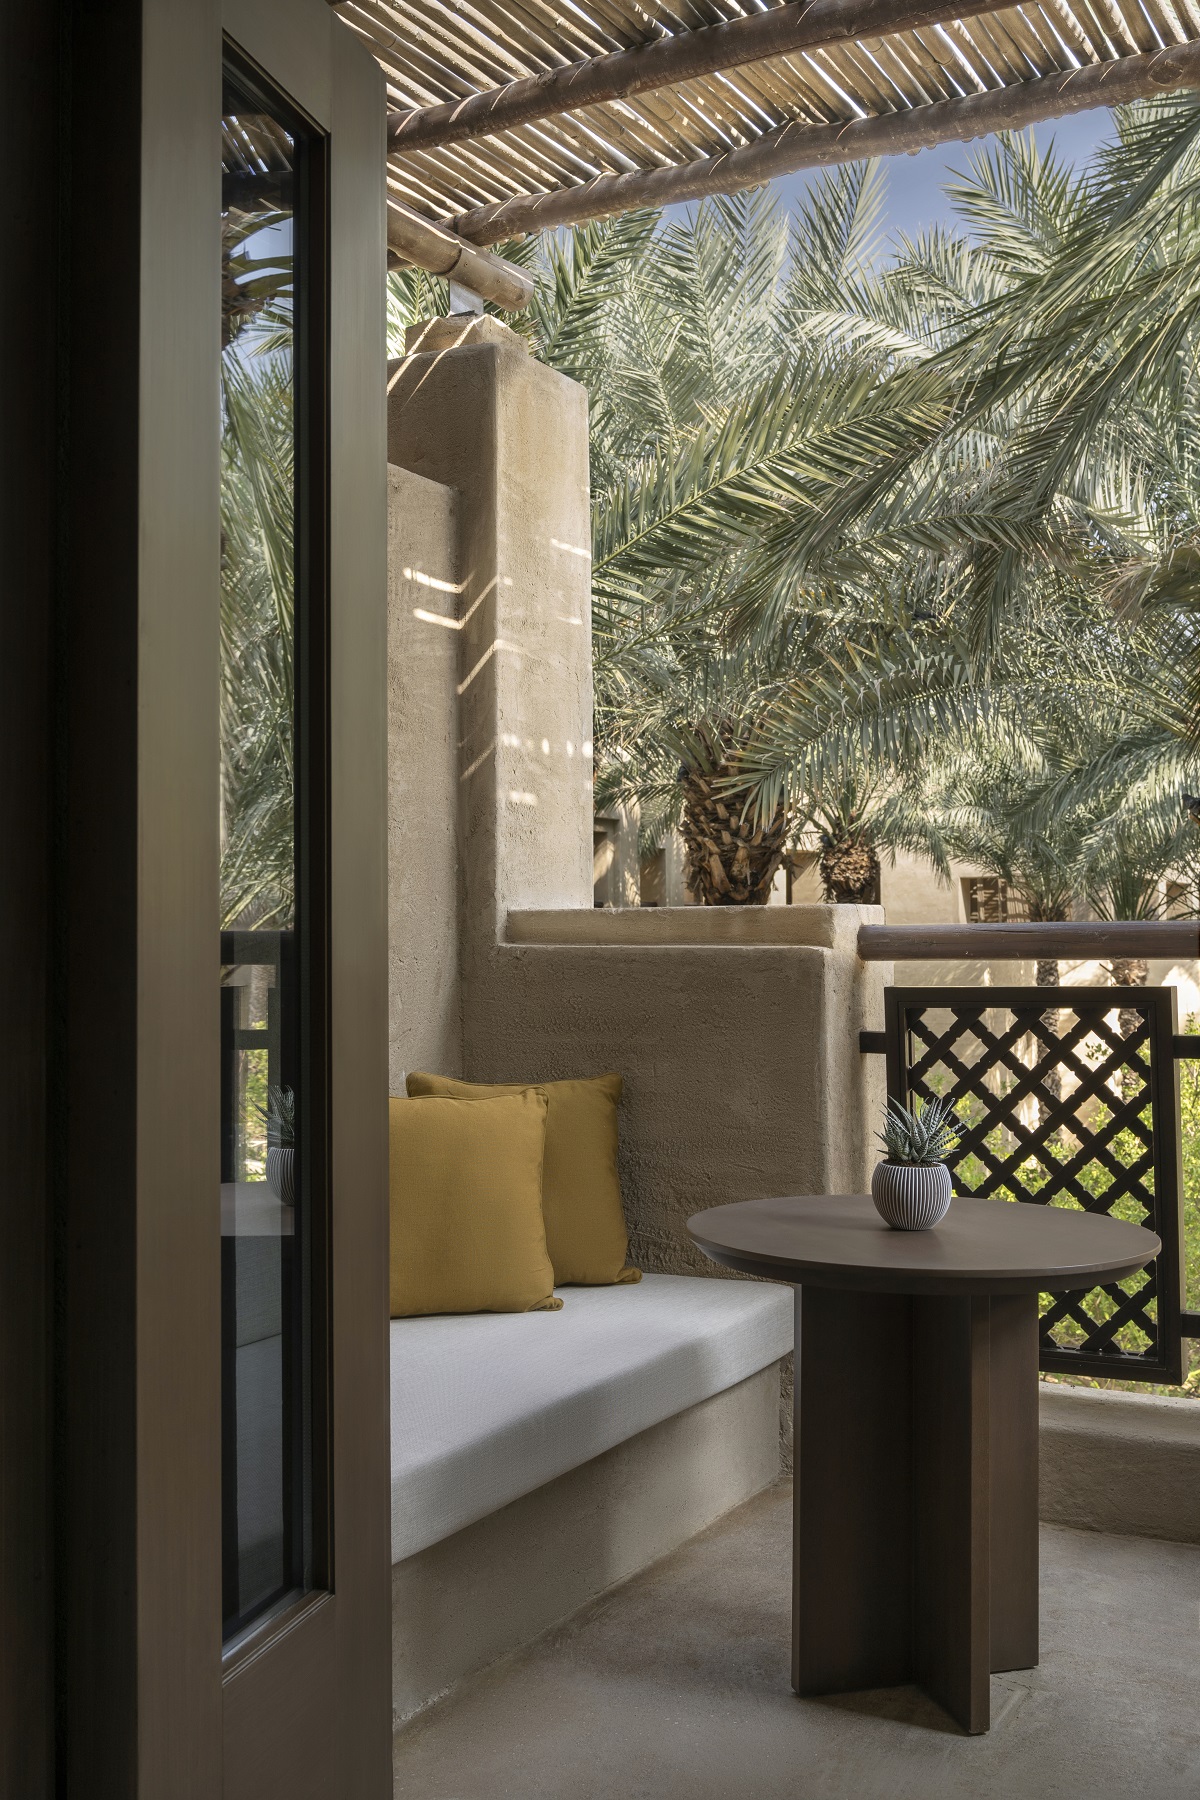 balcony corner at Bab Al Shams with built in seating looking across to palm trees